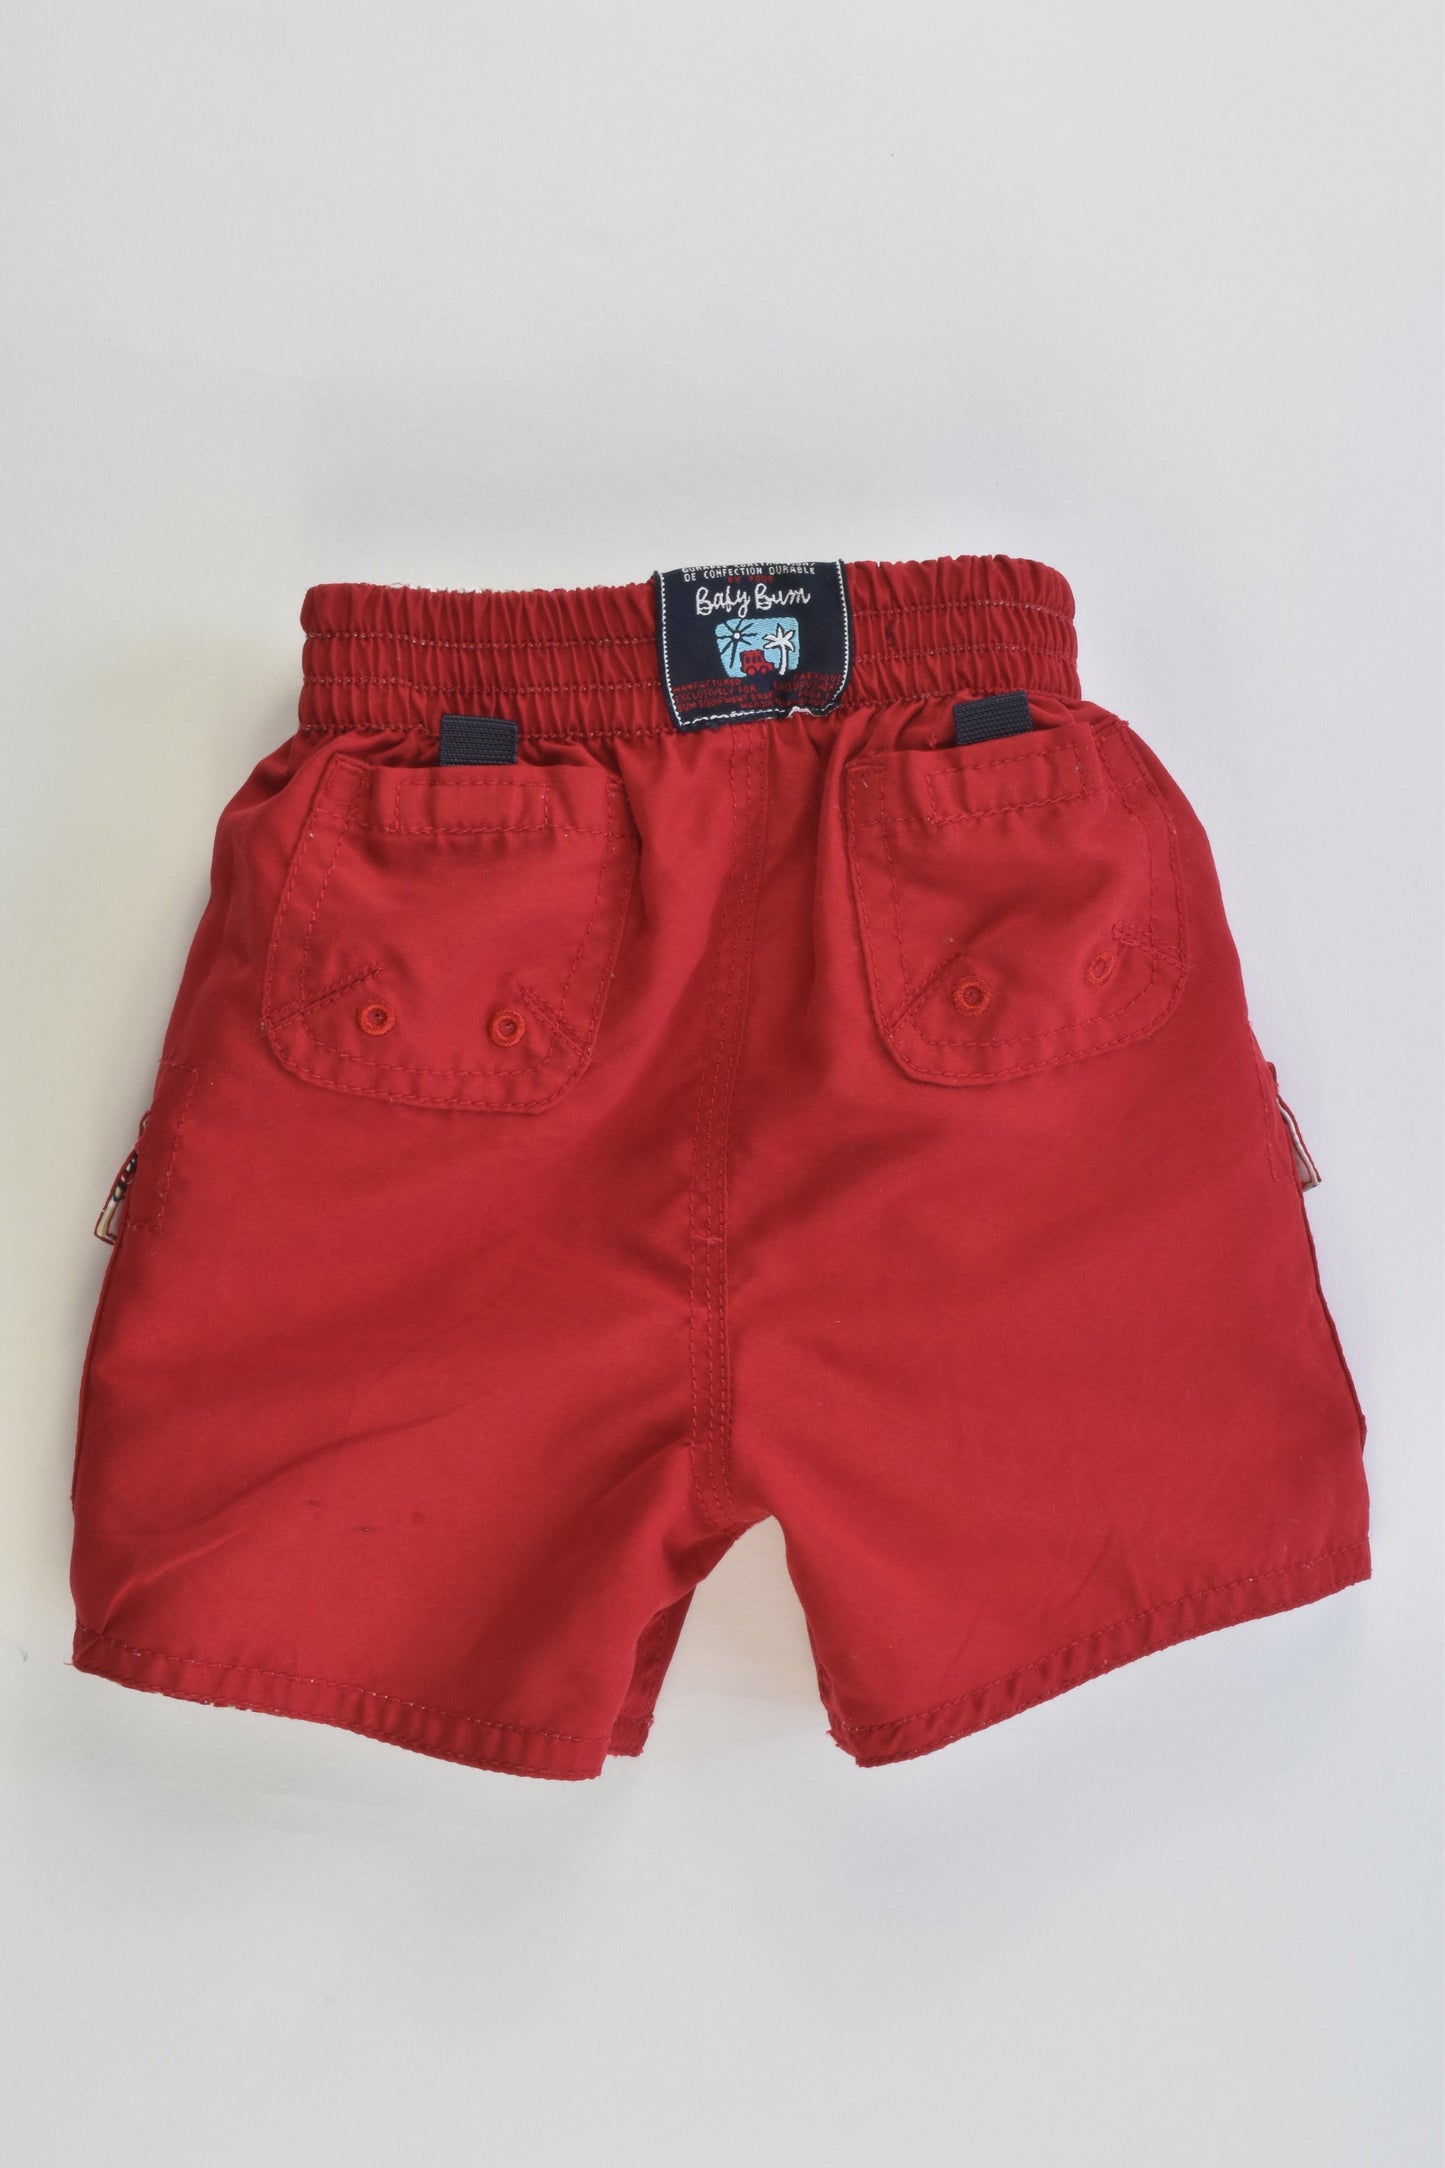 Baby Bum Size approx 00-0 Reversible Board Shorts